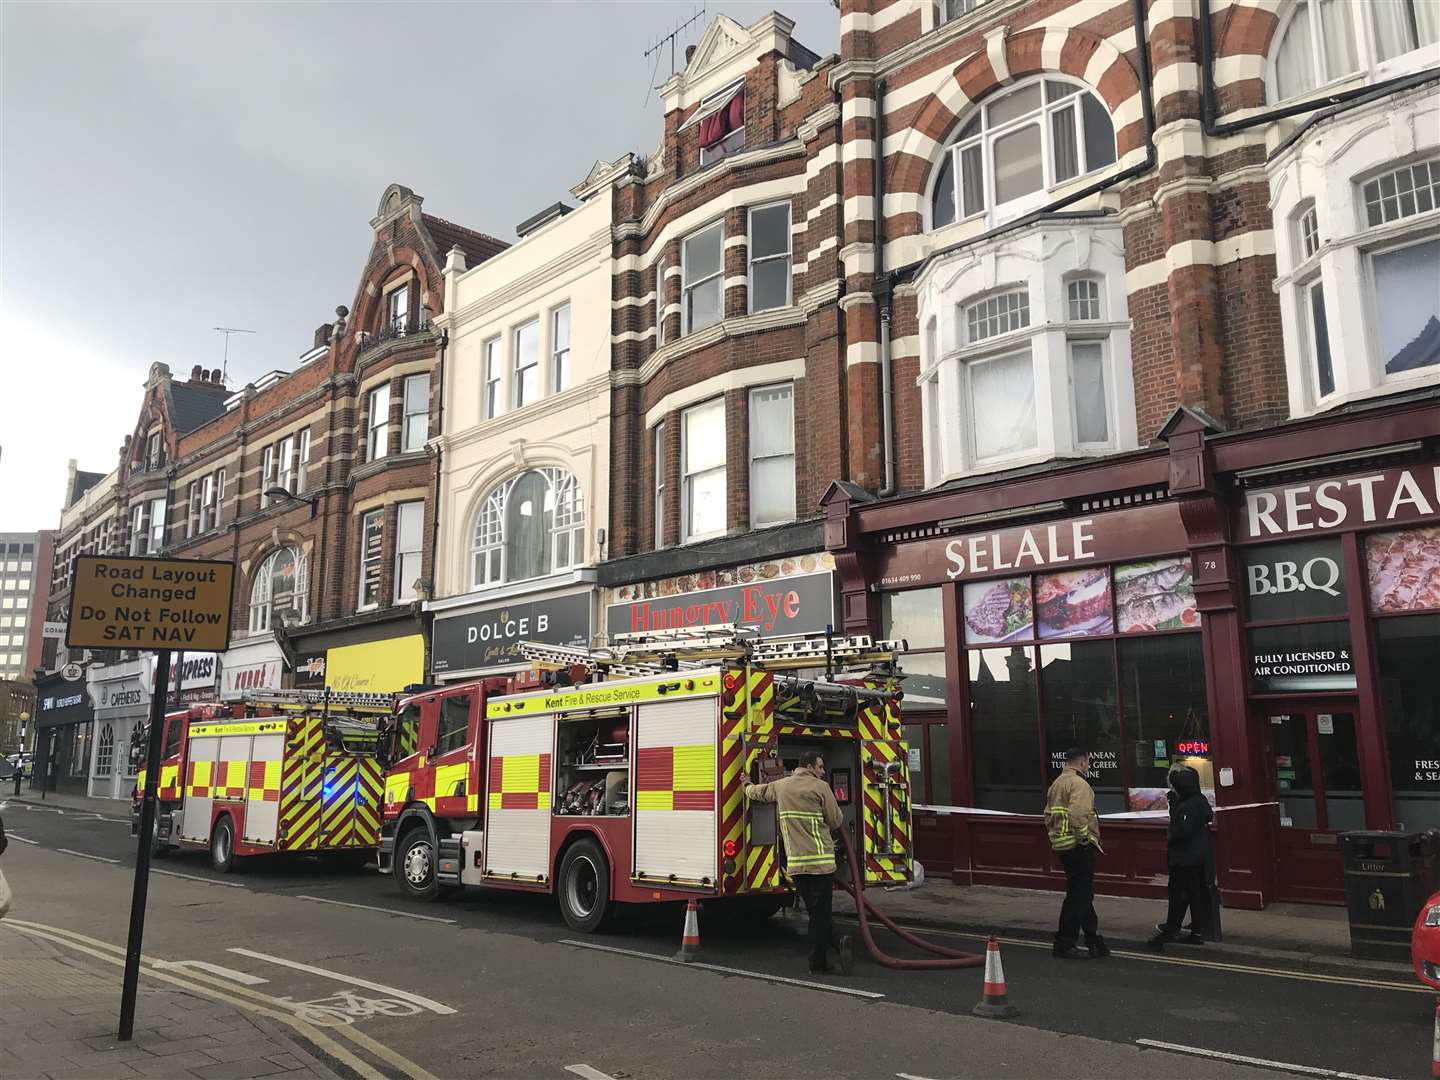 Firefighters at the scene of a blaze in Chatham High Street. Photo: Ronnie Warwick (8265811)